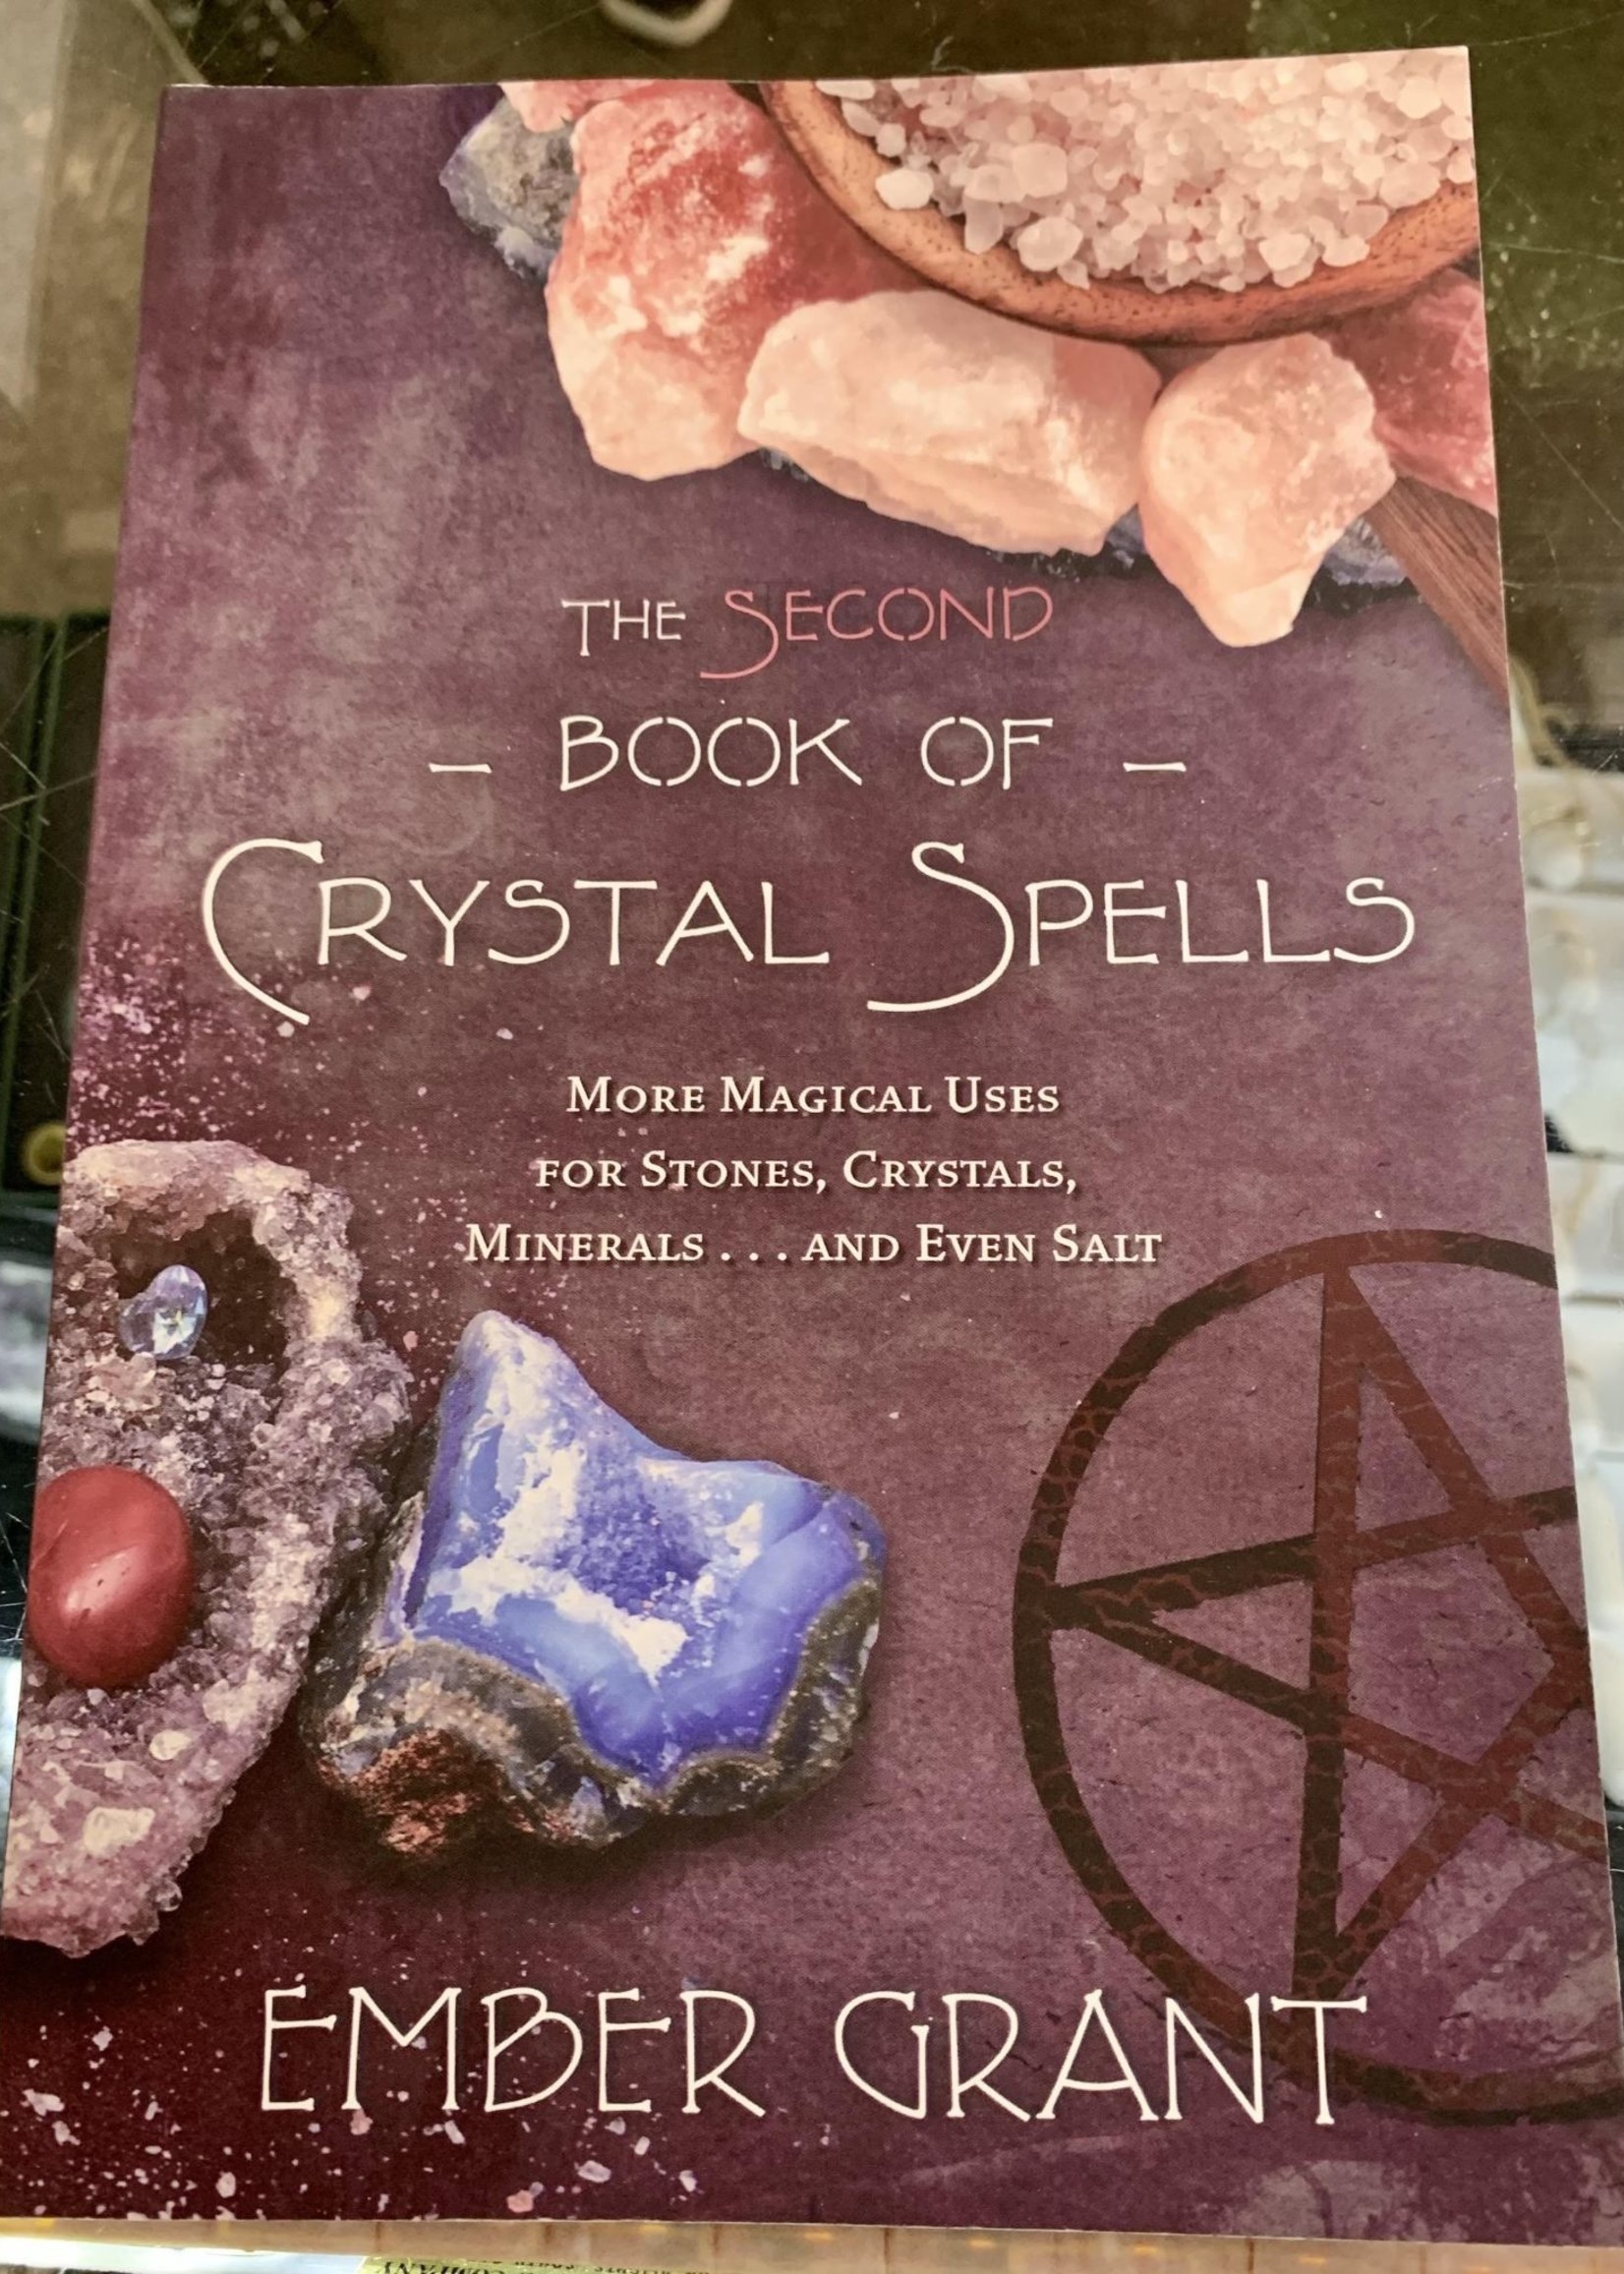 The Second Book of Crystal Spells -  BY EMBER GRANT